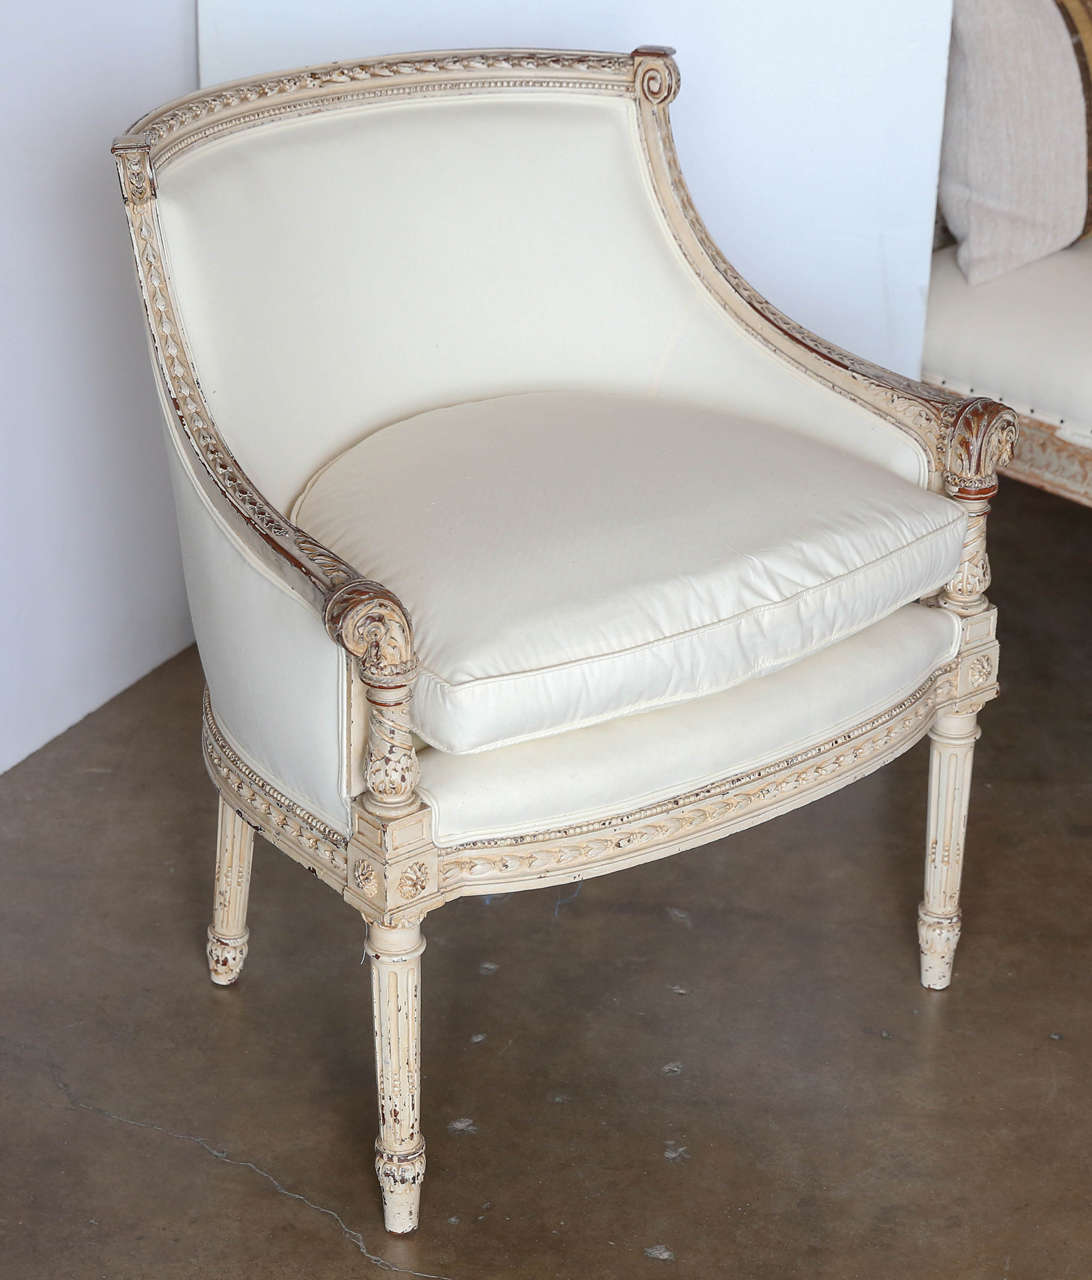 Pair of Louis XVI Barrel chairs with original paint and detailed carving.